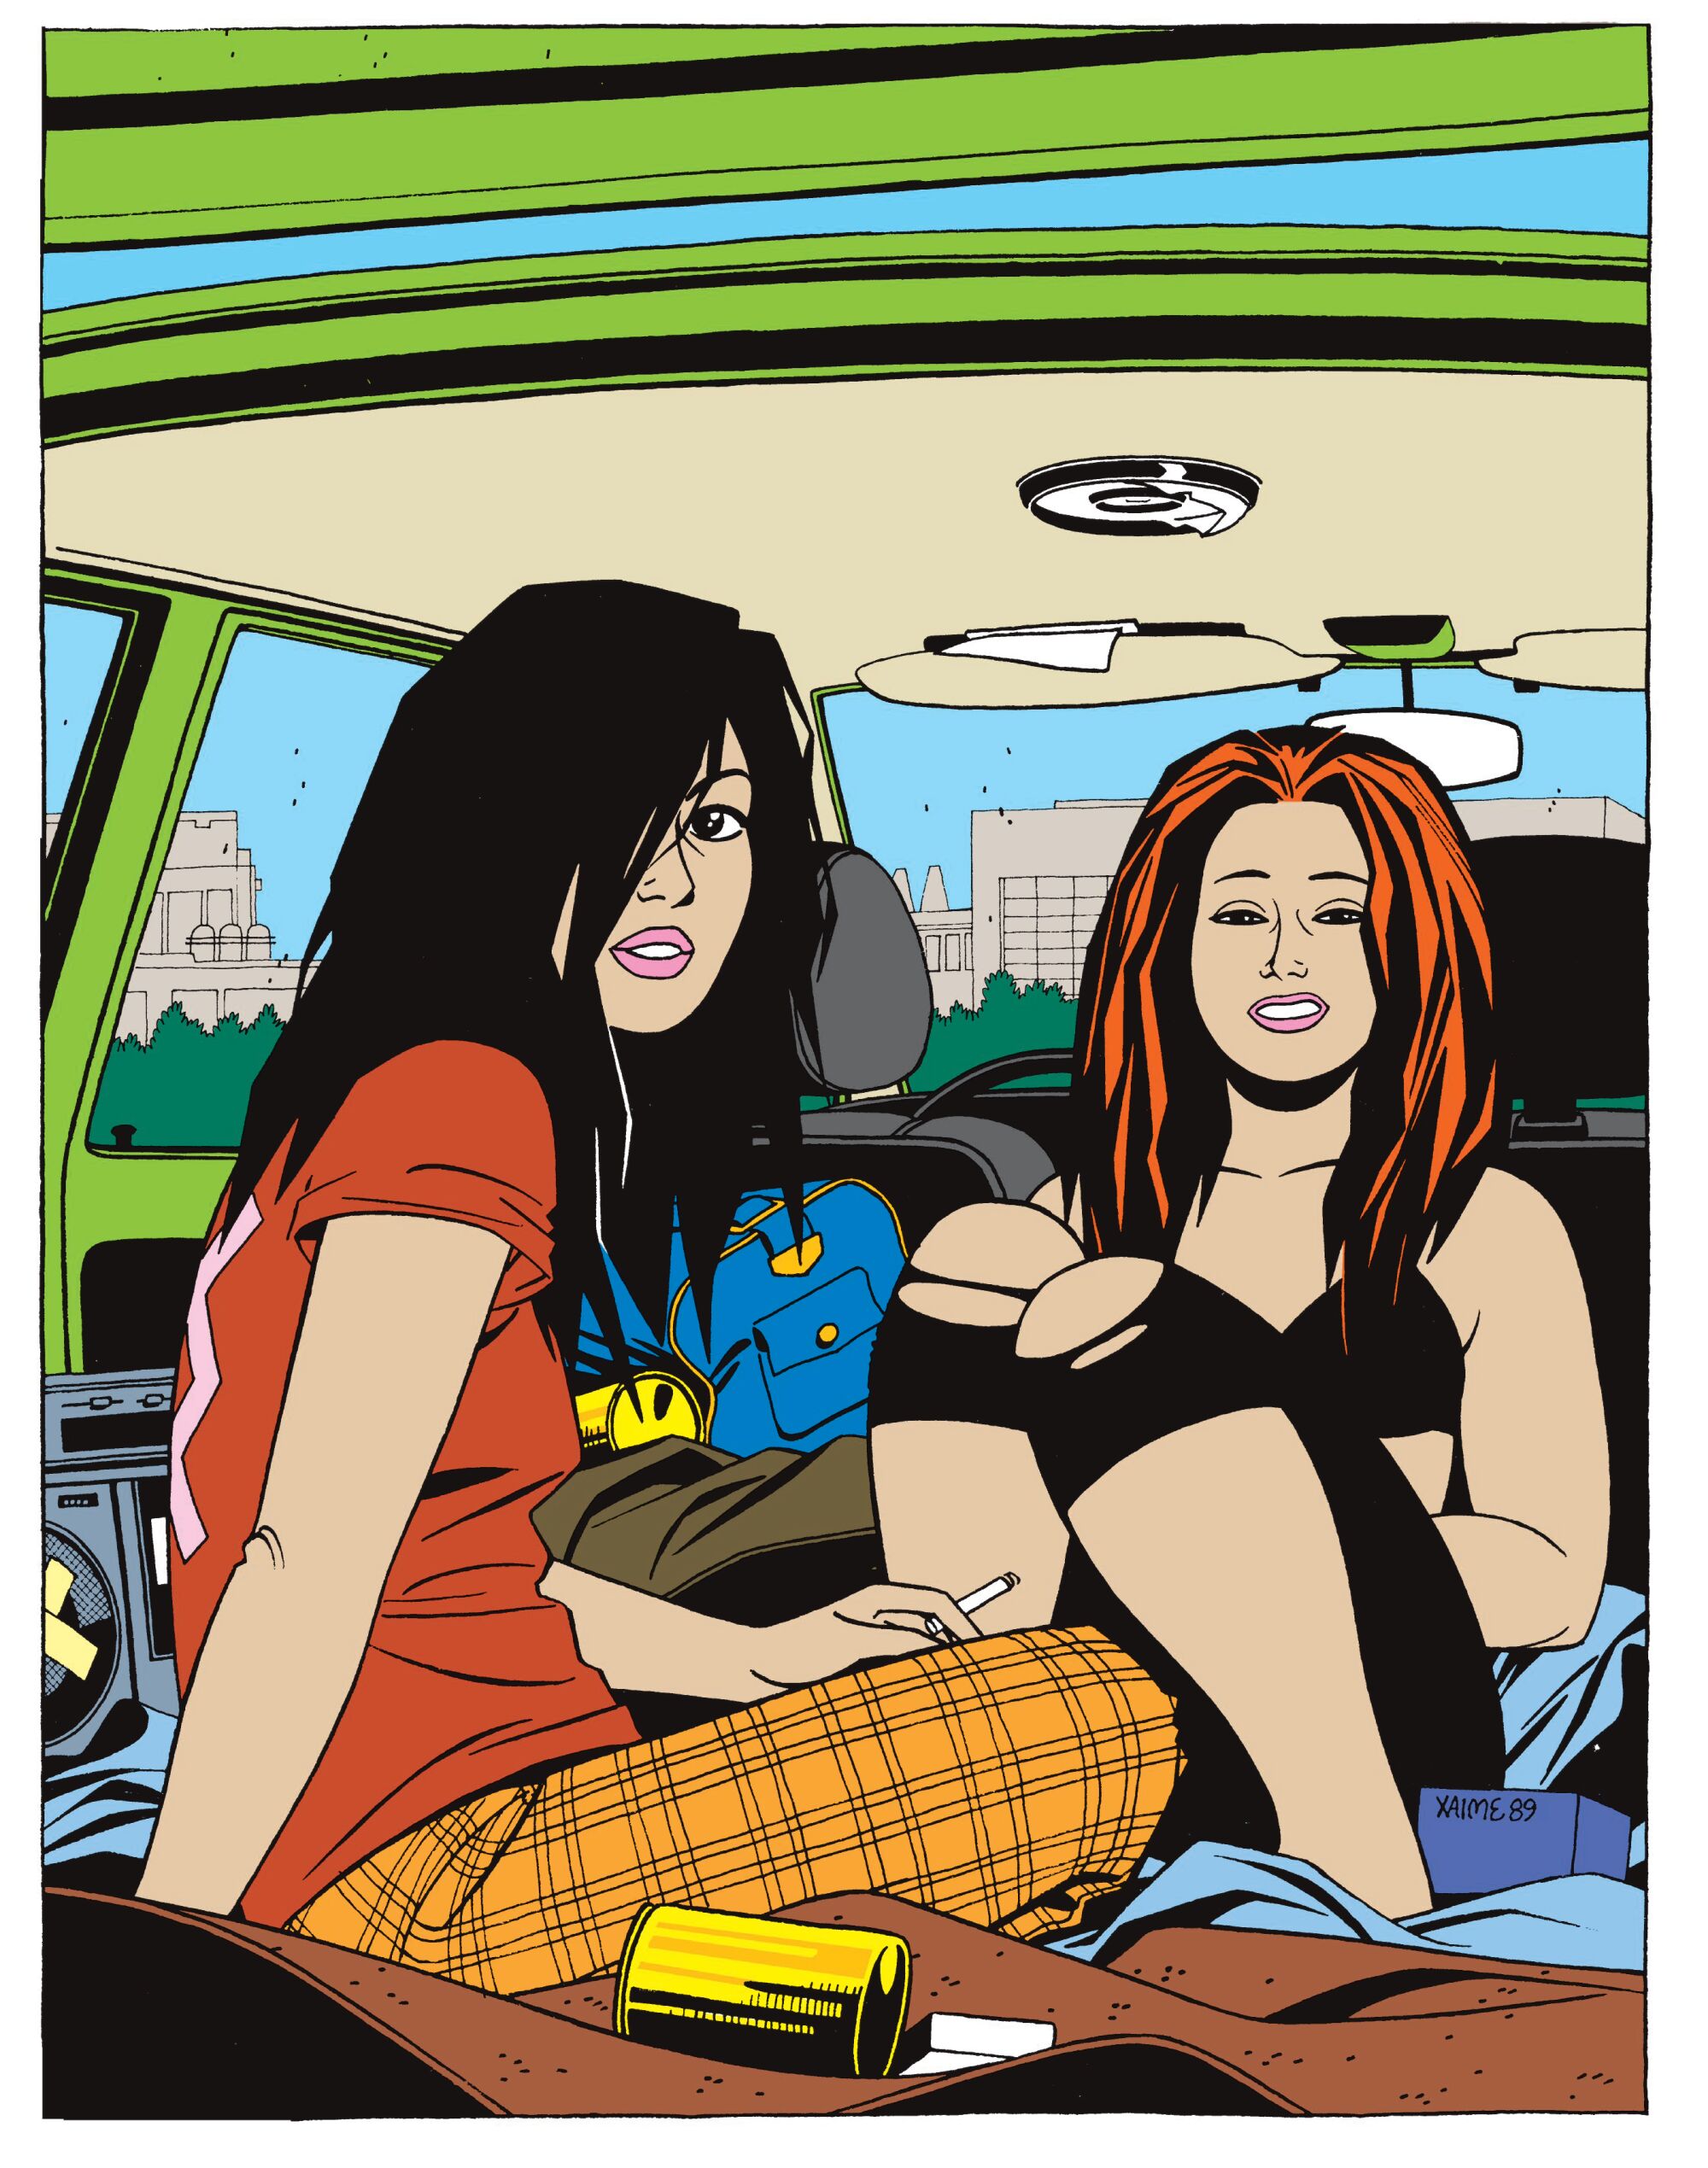 An illustration shows "Love & Rockets" characters Hopey and Maggie dressed like punk rockers sitting inside a car